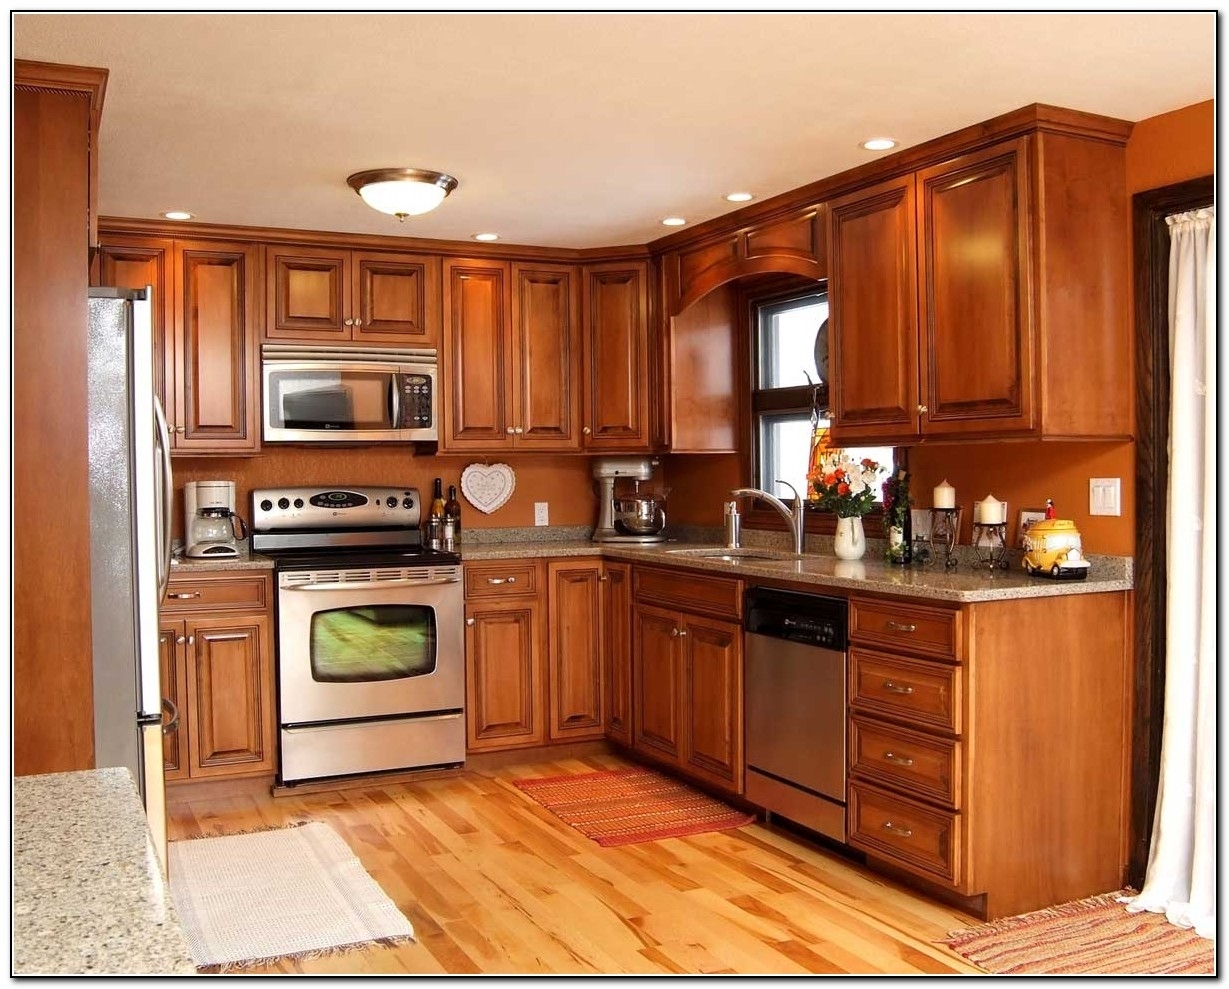  kitchen ideas with oak cabinets